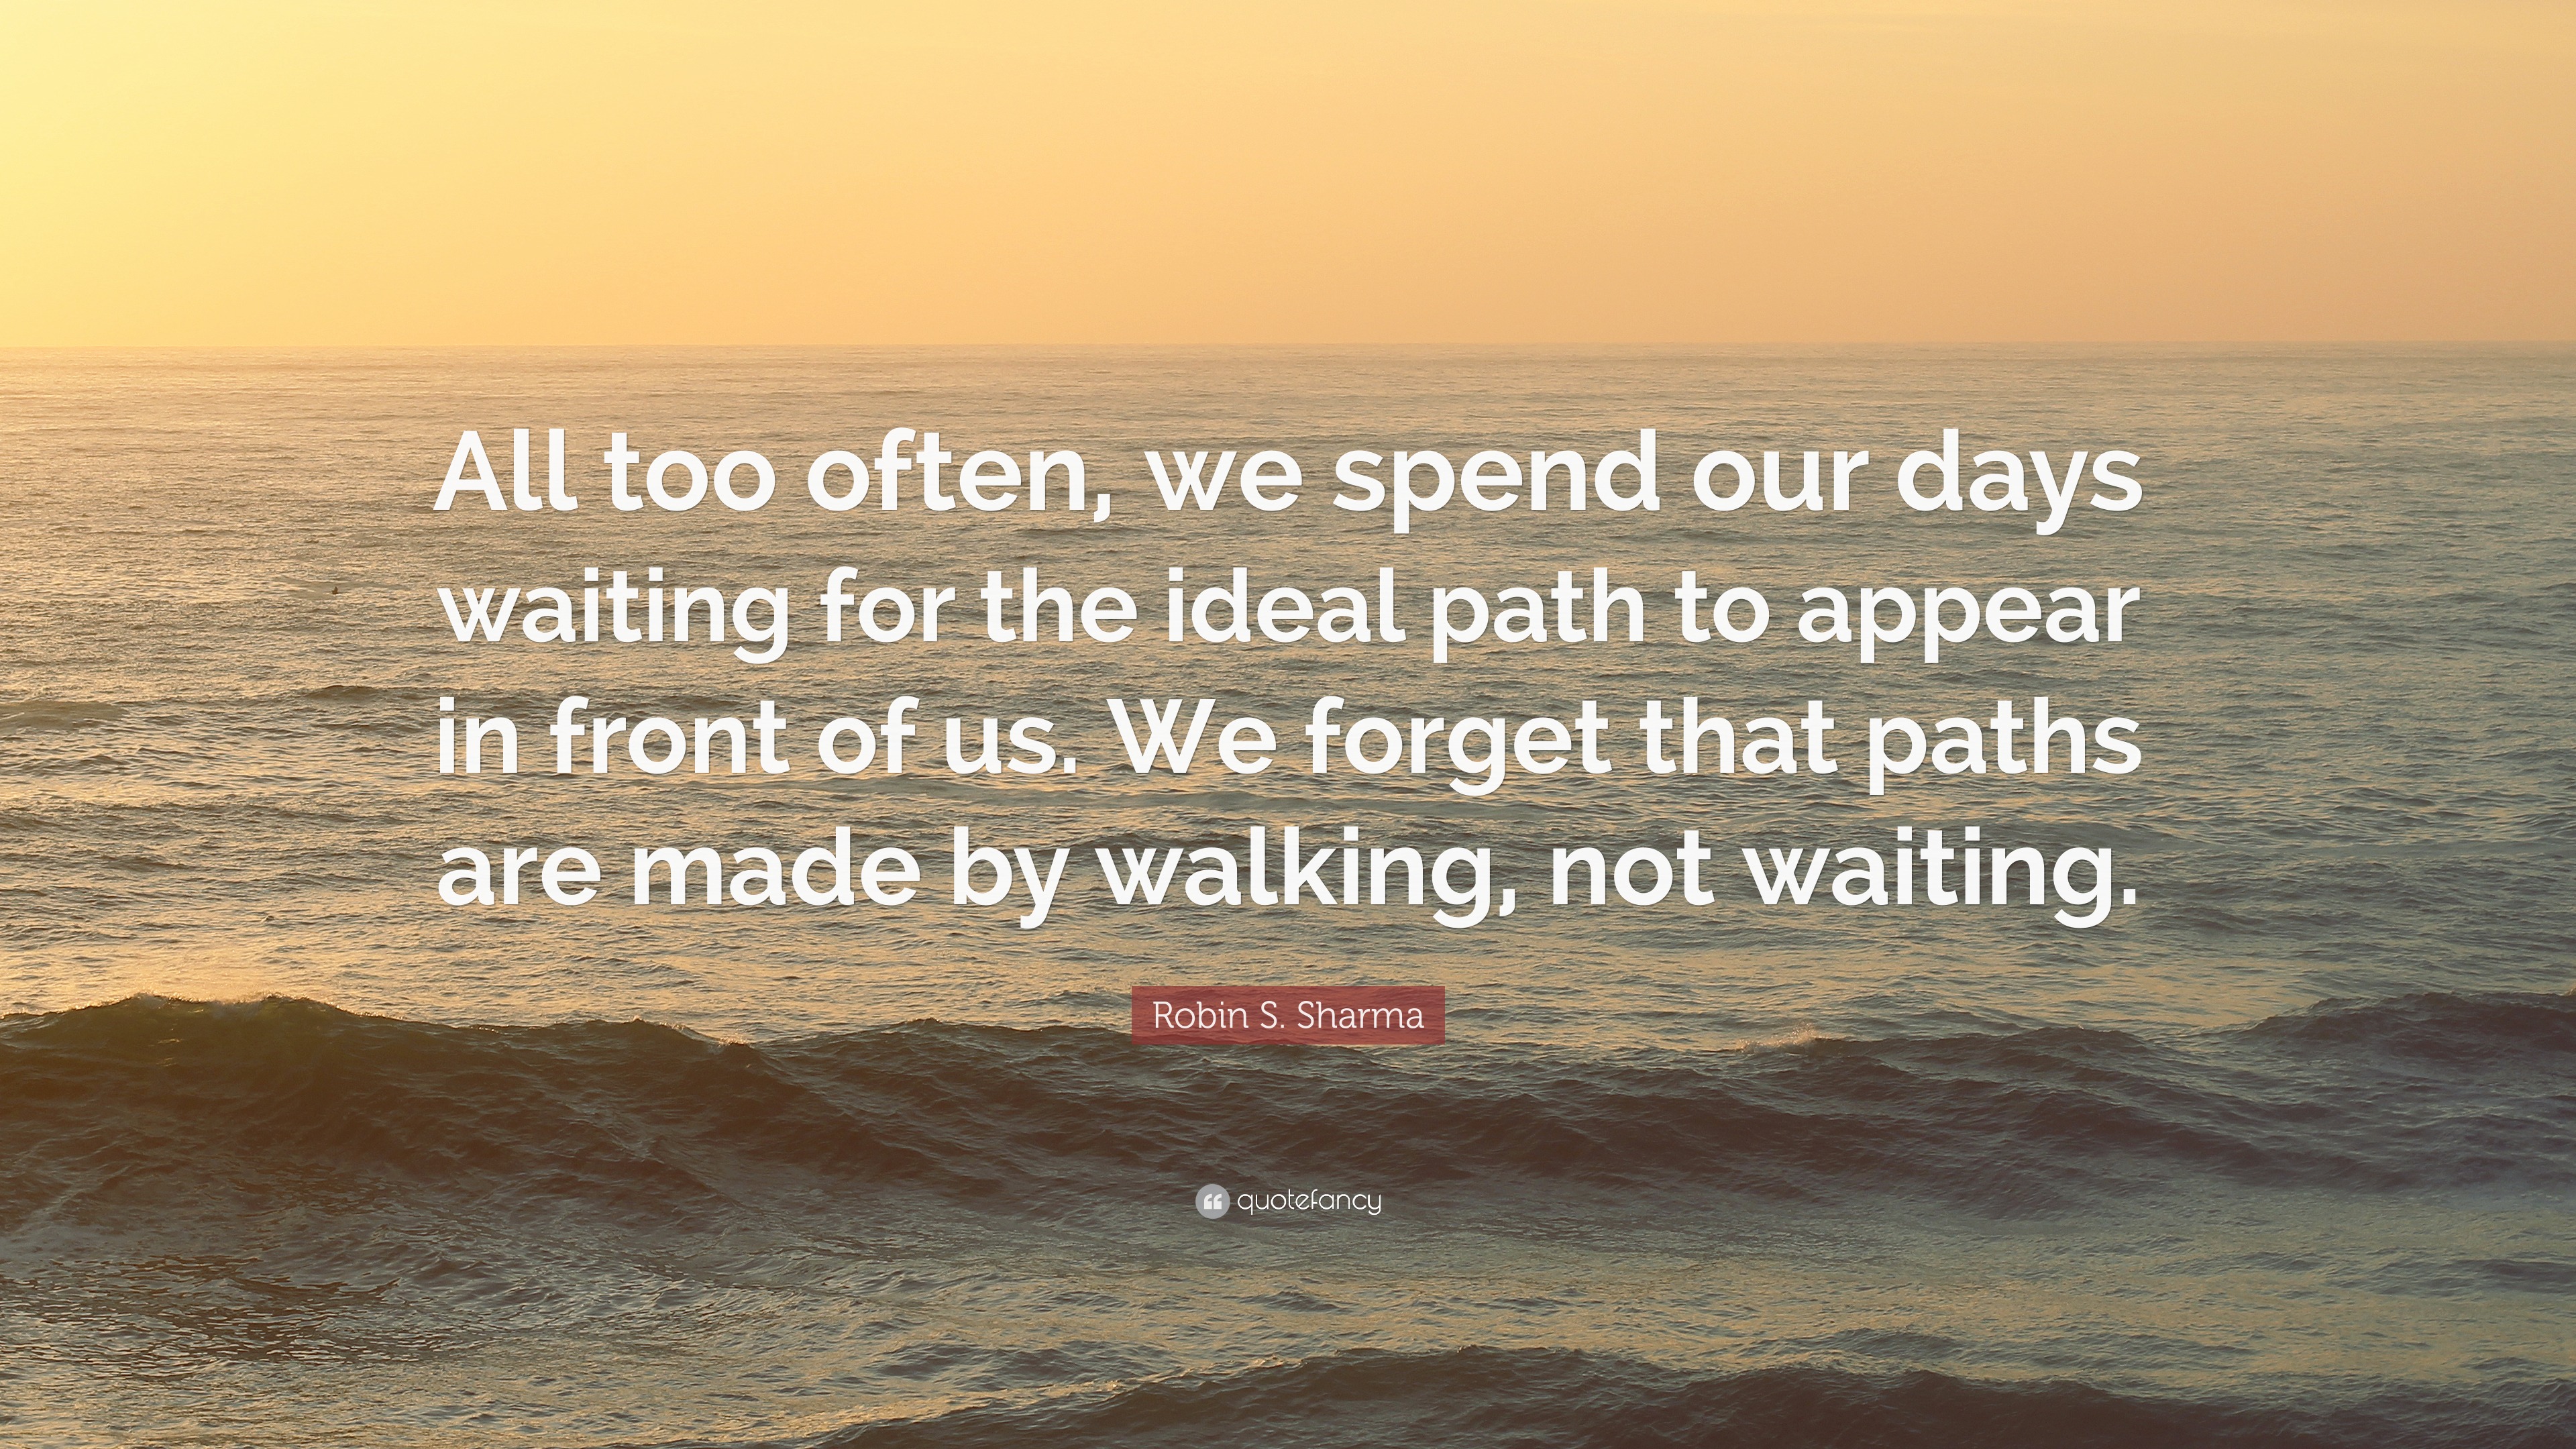 Robin S. Sharma Quote: “All too often, we spend our days waiting for ...